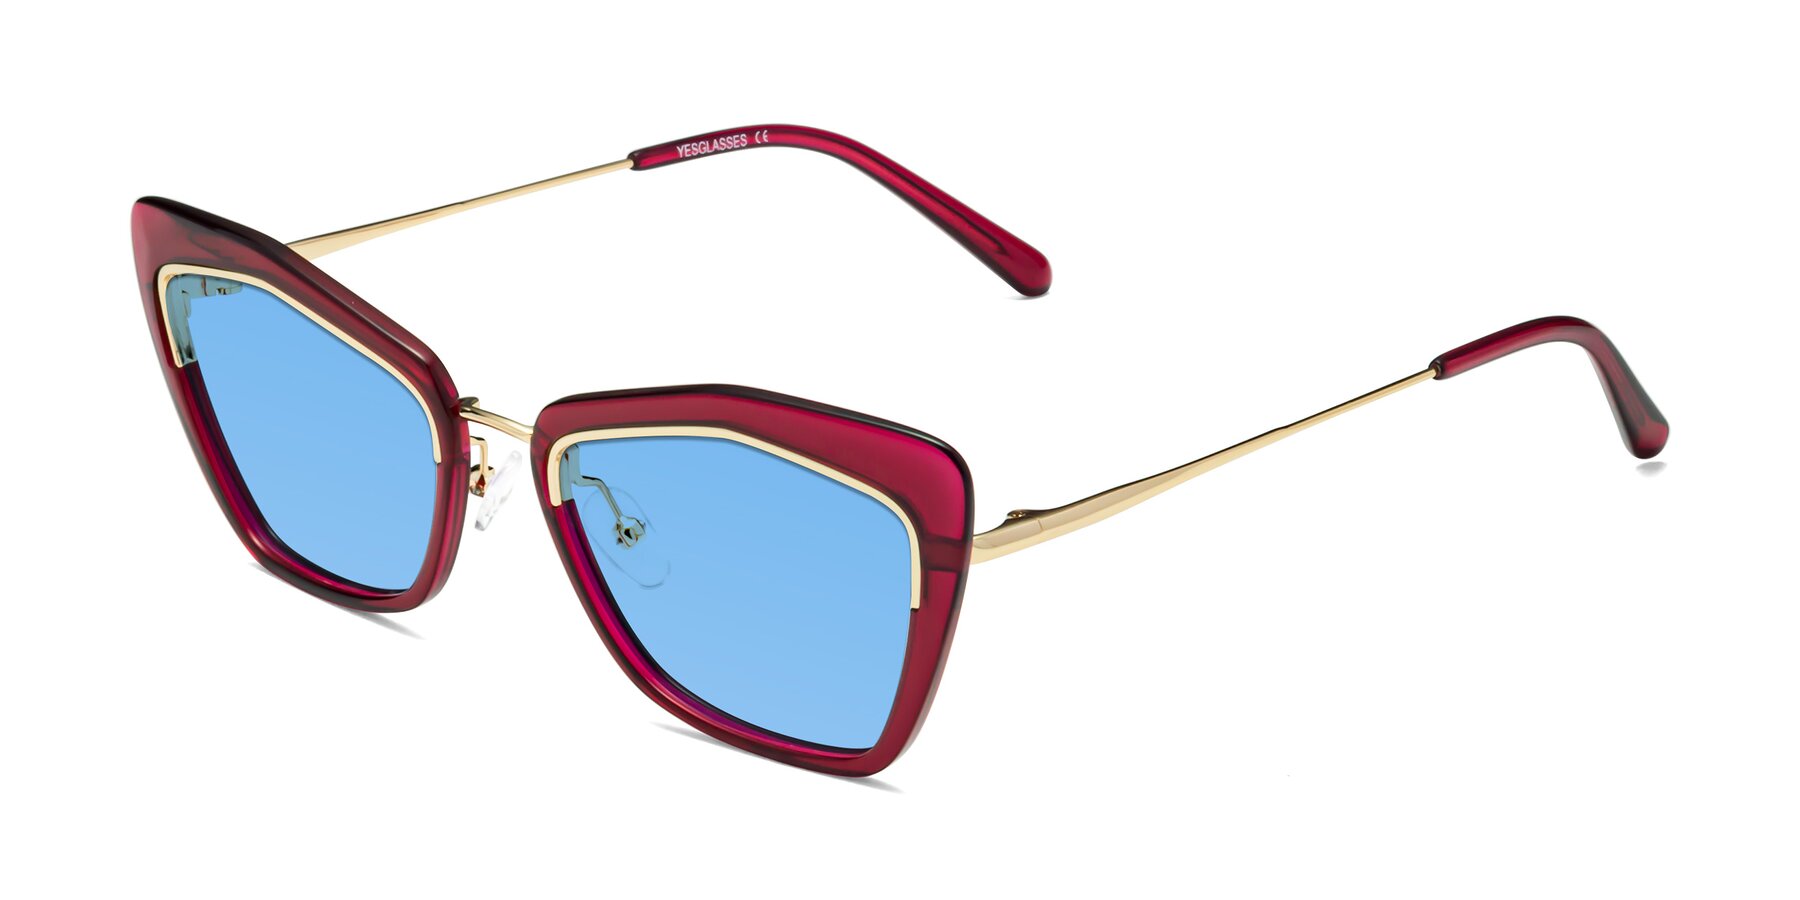 Angle of Lasso in Wine with Medium Blue Tinted Lenses